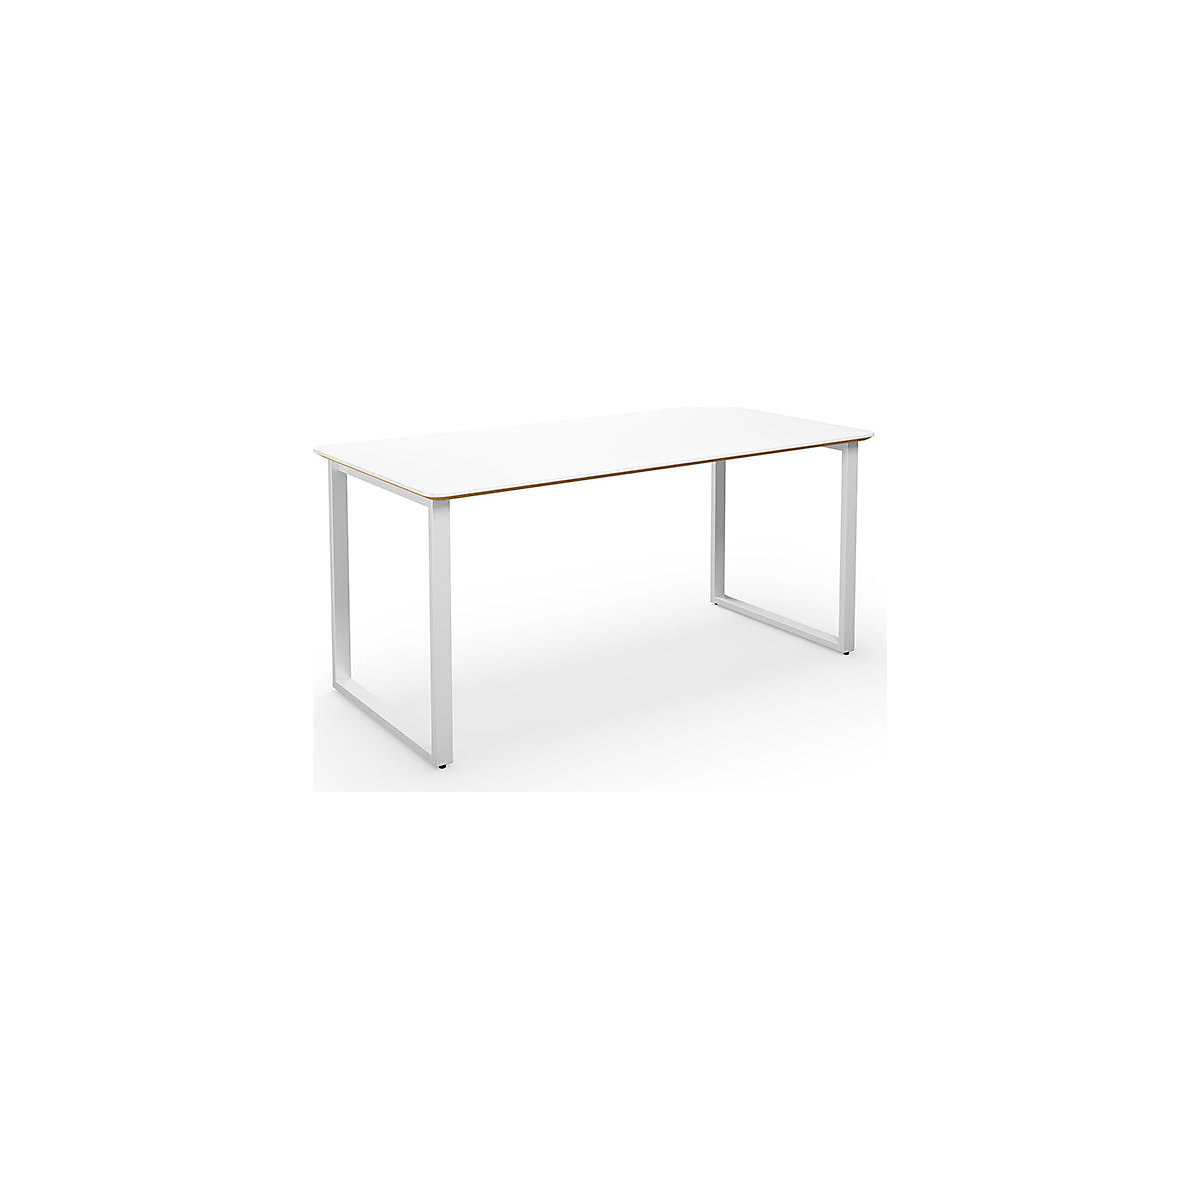 DUO-O Trend multi-purpose desk, straight tabletop, rounded corners, WxD 1600 x 800 mm, white, white-3